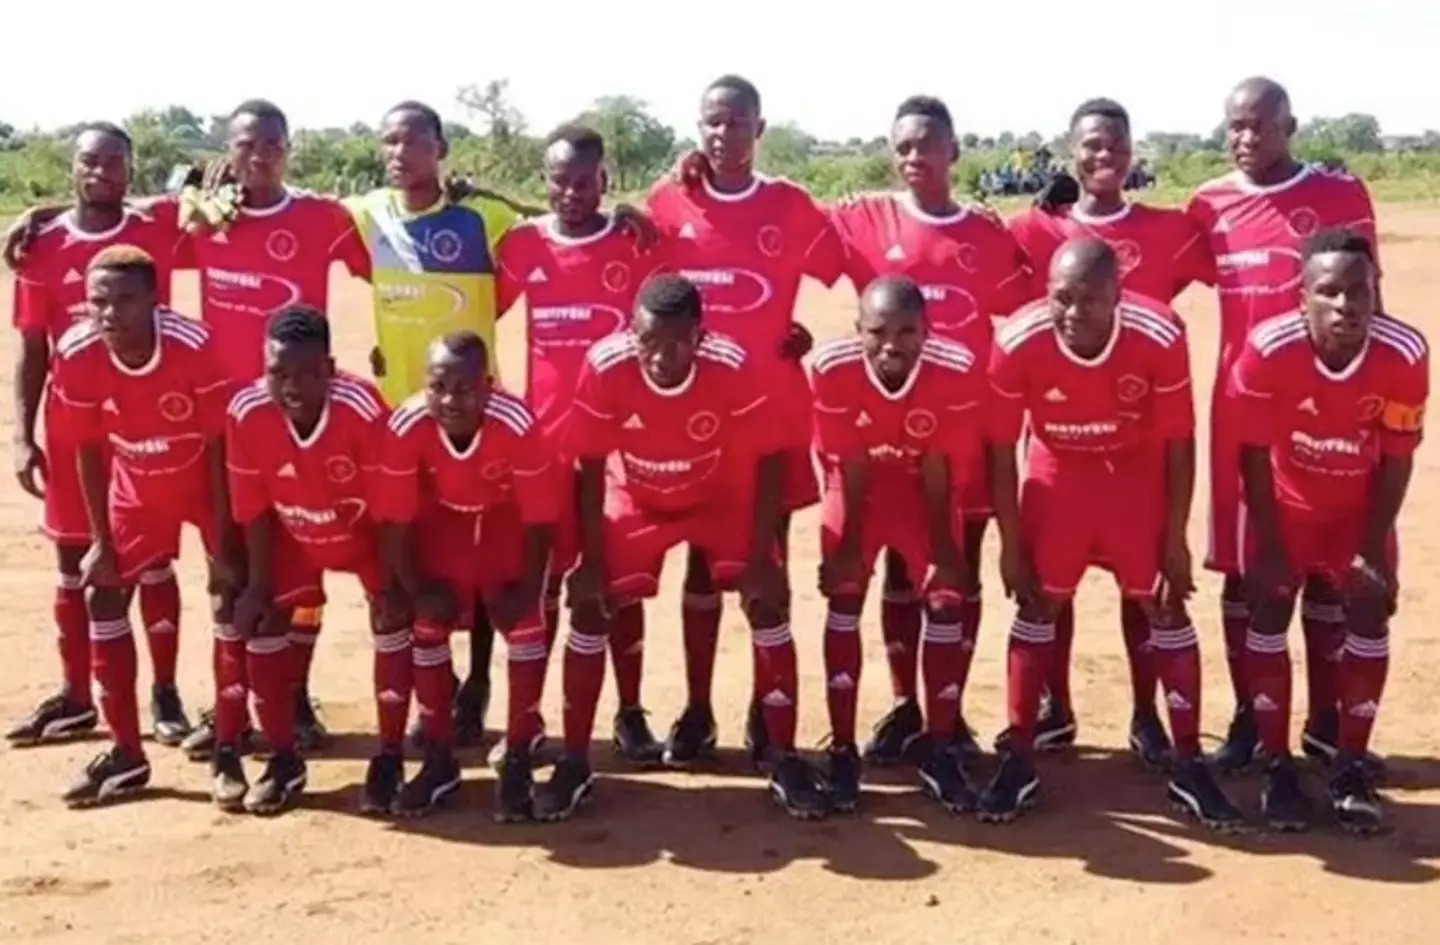 Matiyasi FC (pictured) were defeated 59-1 by Nsami Mighty Birds.